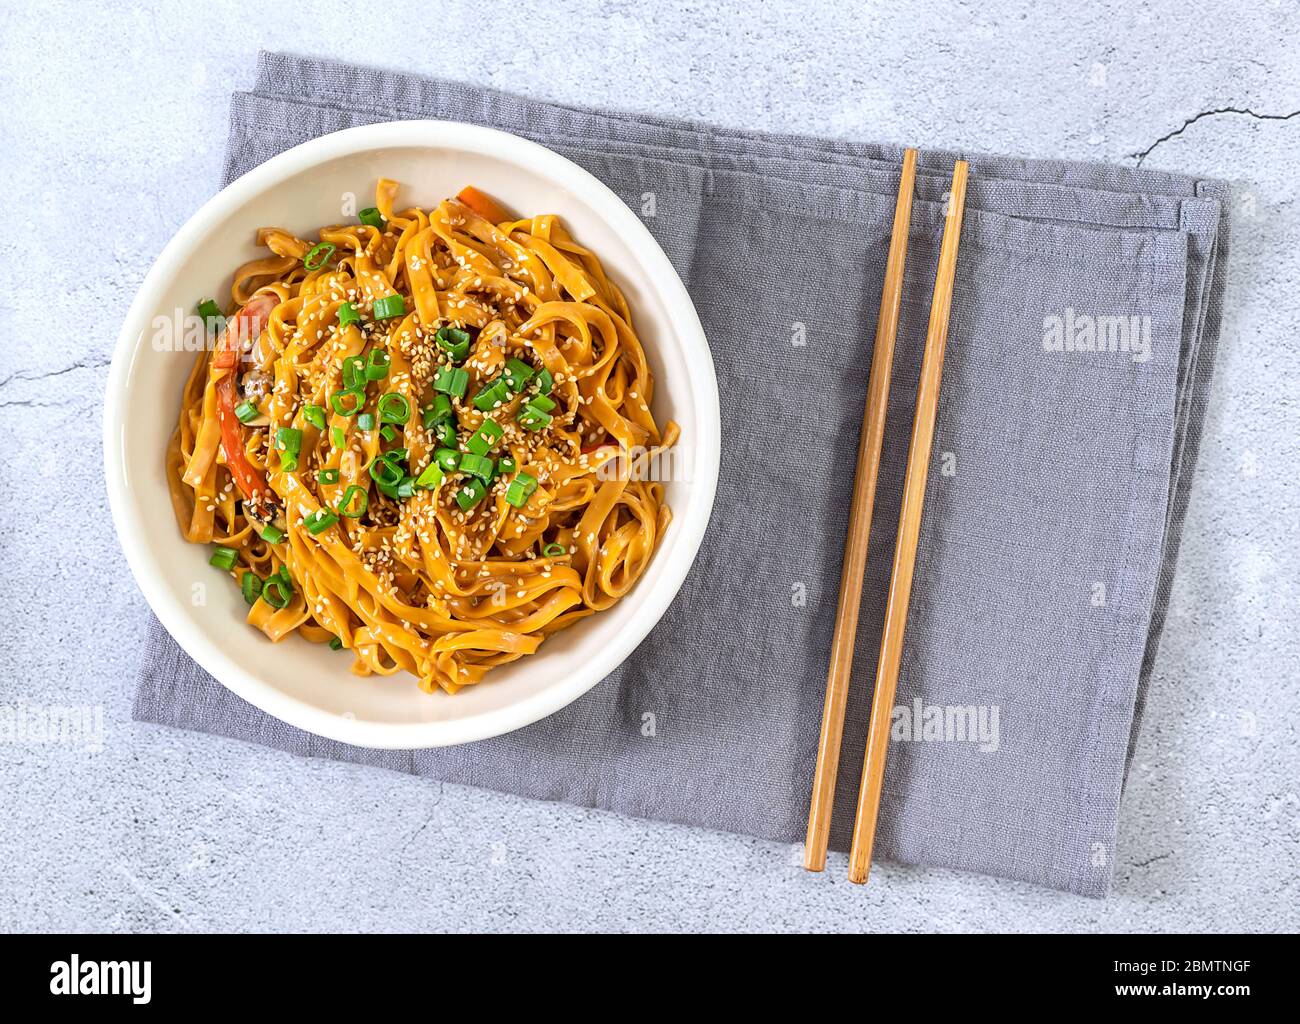 Top view of asian vegetarian chili noodles with bamboo chopsticks Stock Photo